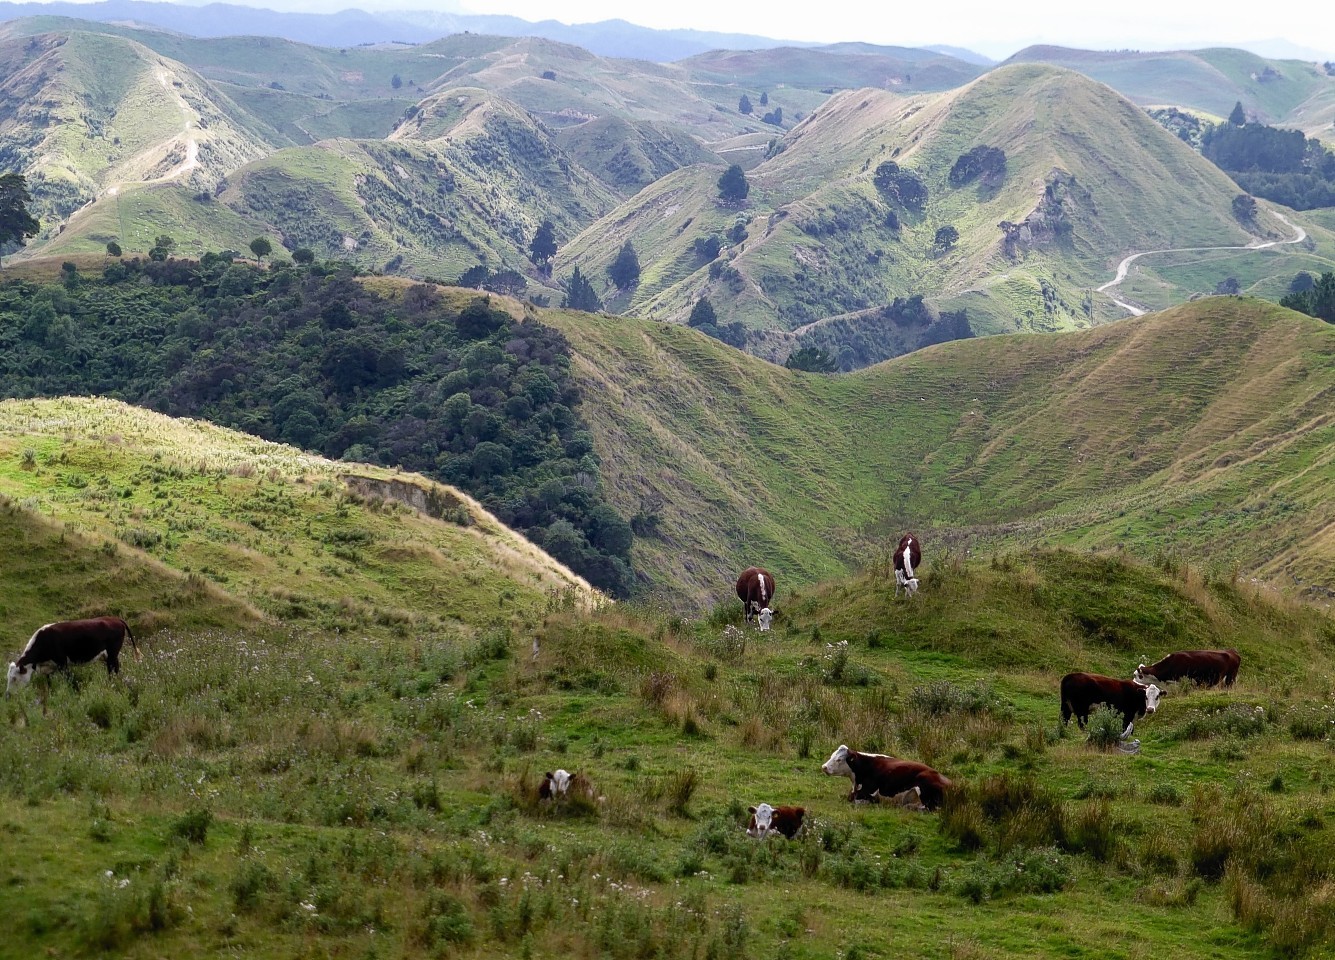 Hereford cattle grazing the hills in New Zealand